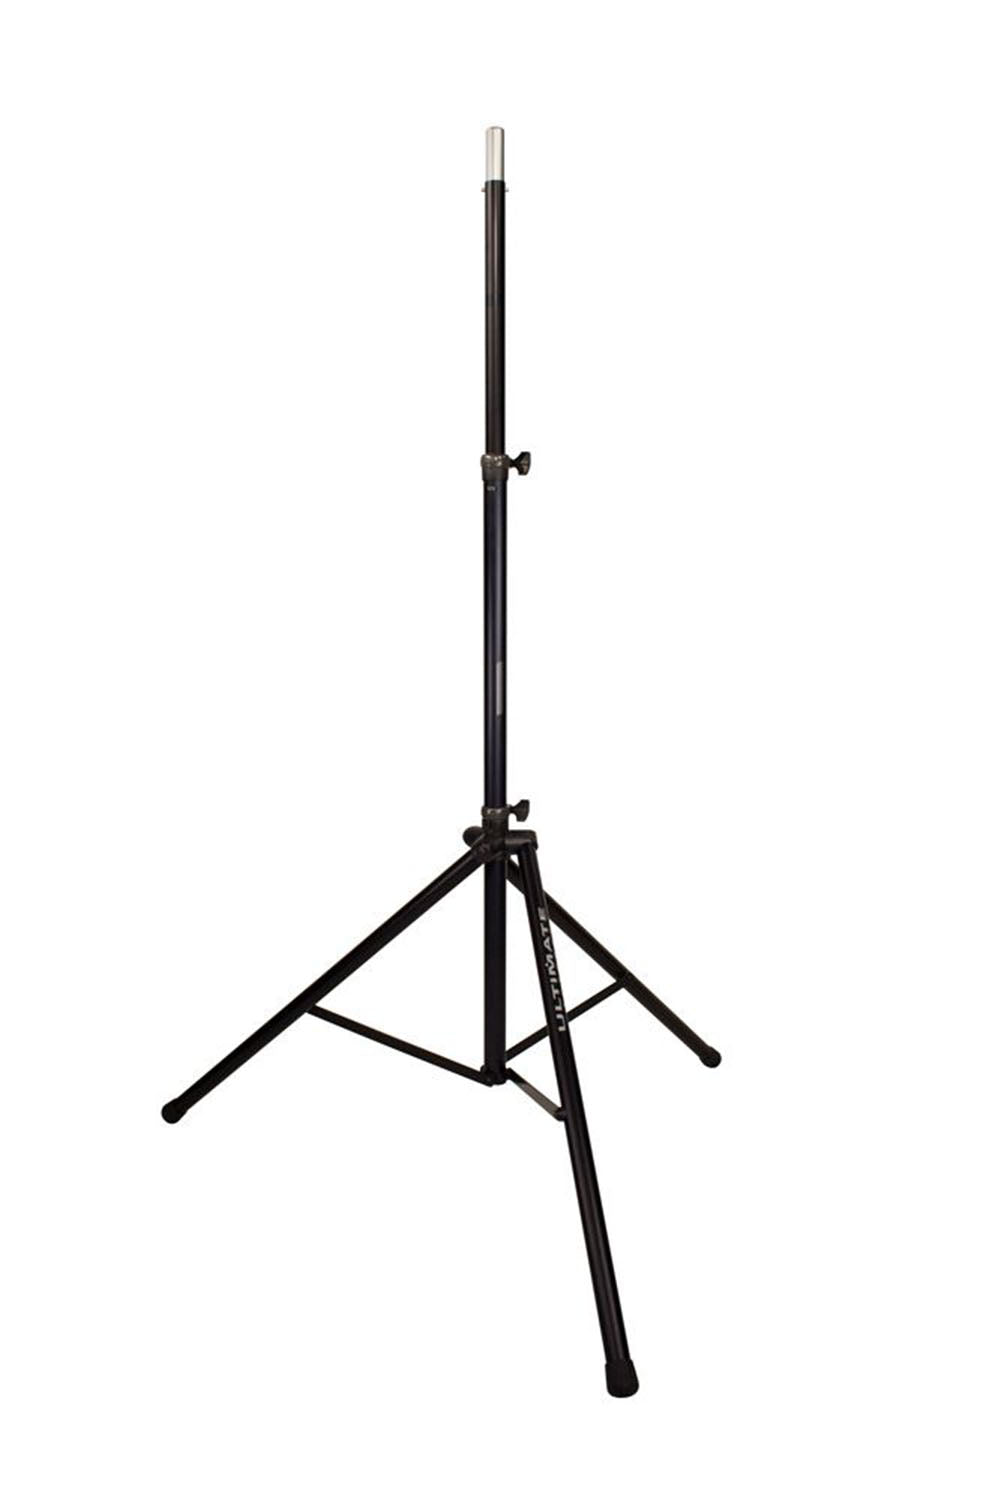 B-Stock: Ultimate Support TS88B Aluminum Tripod Stand For Speaker - Hollywood DJ